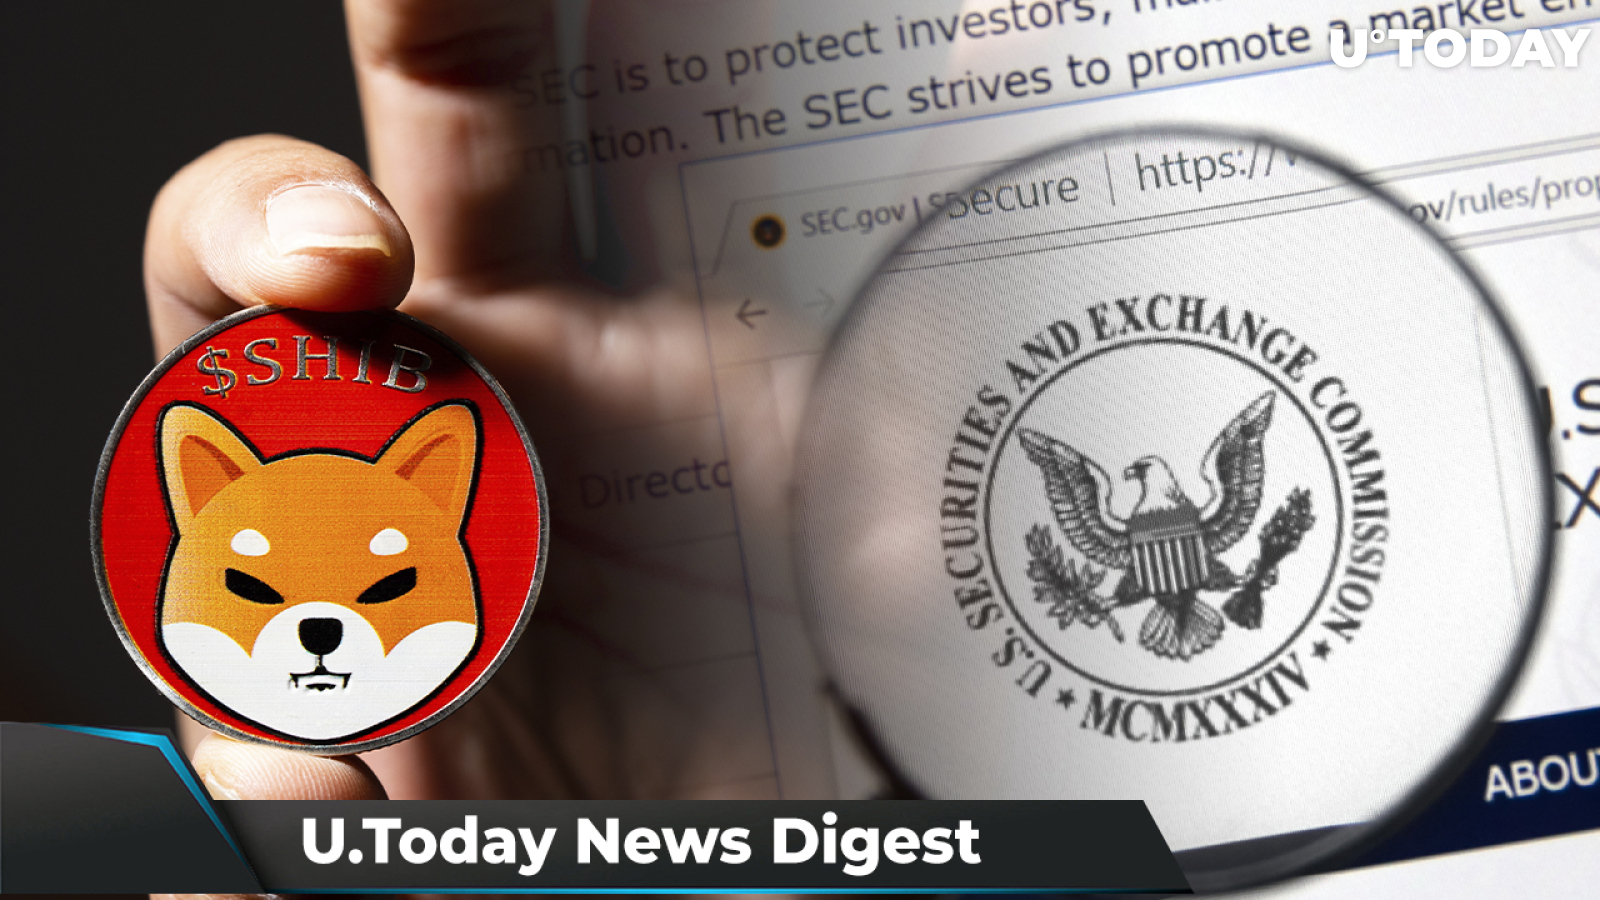 20 Billion SHIB Destroyed by Burn Portal, Solana Goes Down, SEC Attempts to Protect Hinman Emails: Crypto News Digest by U.Today